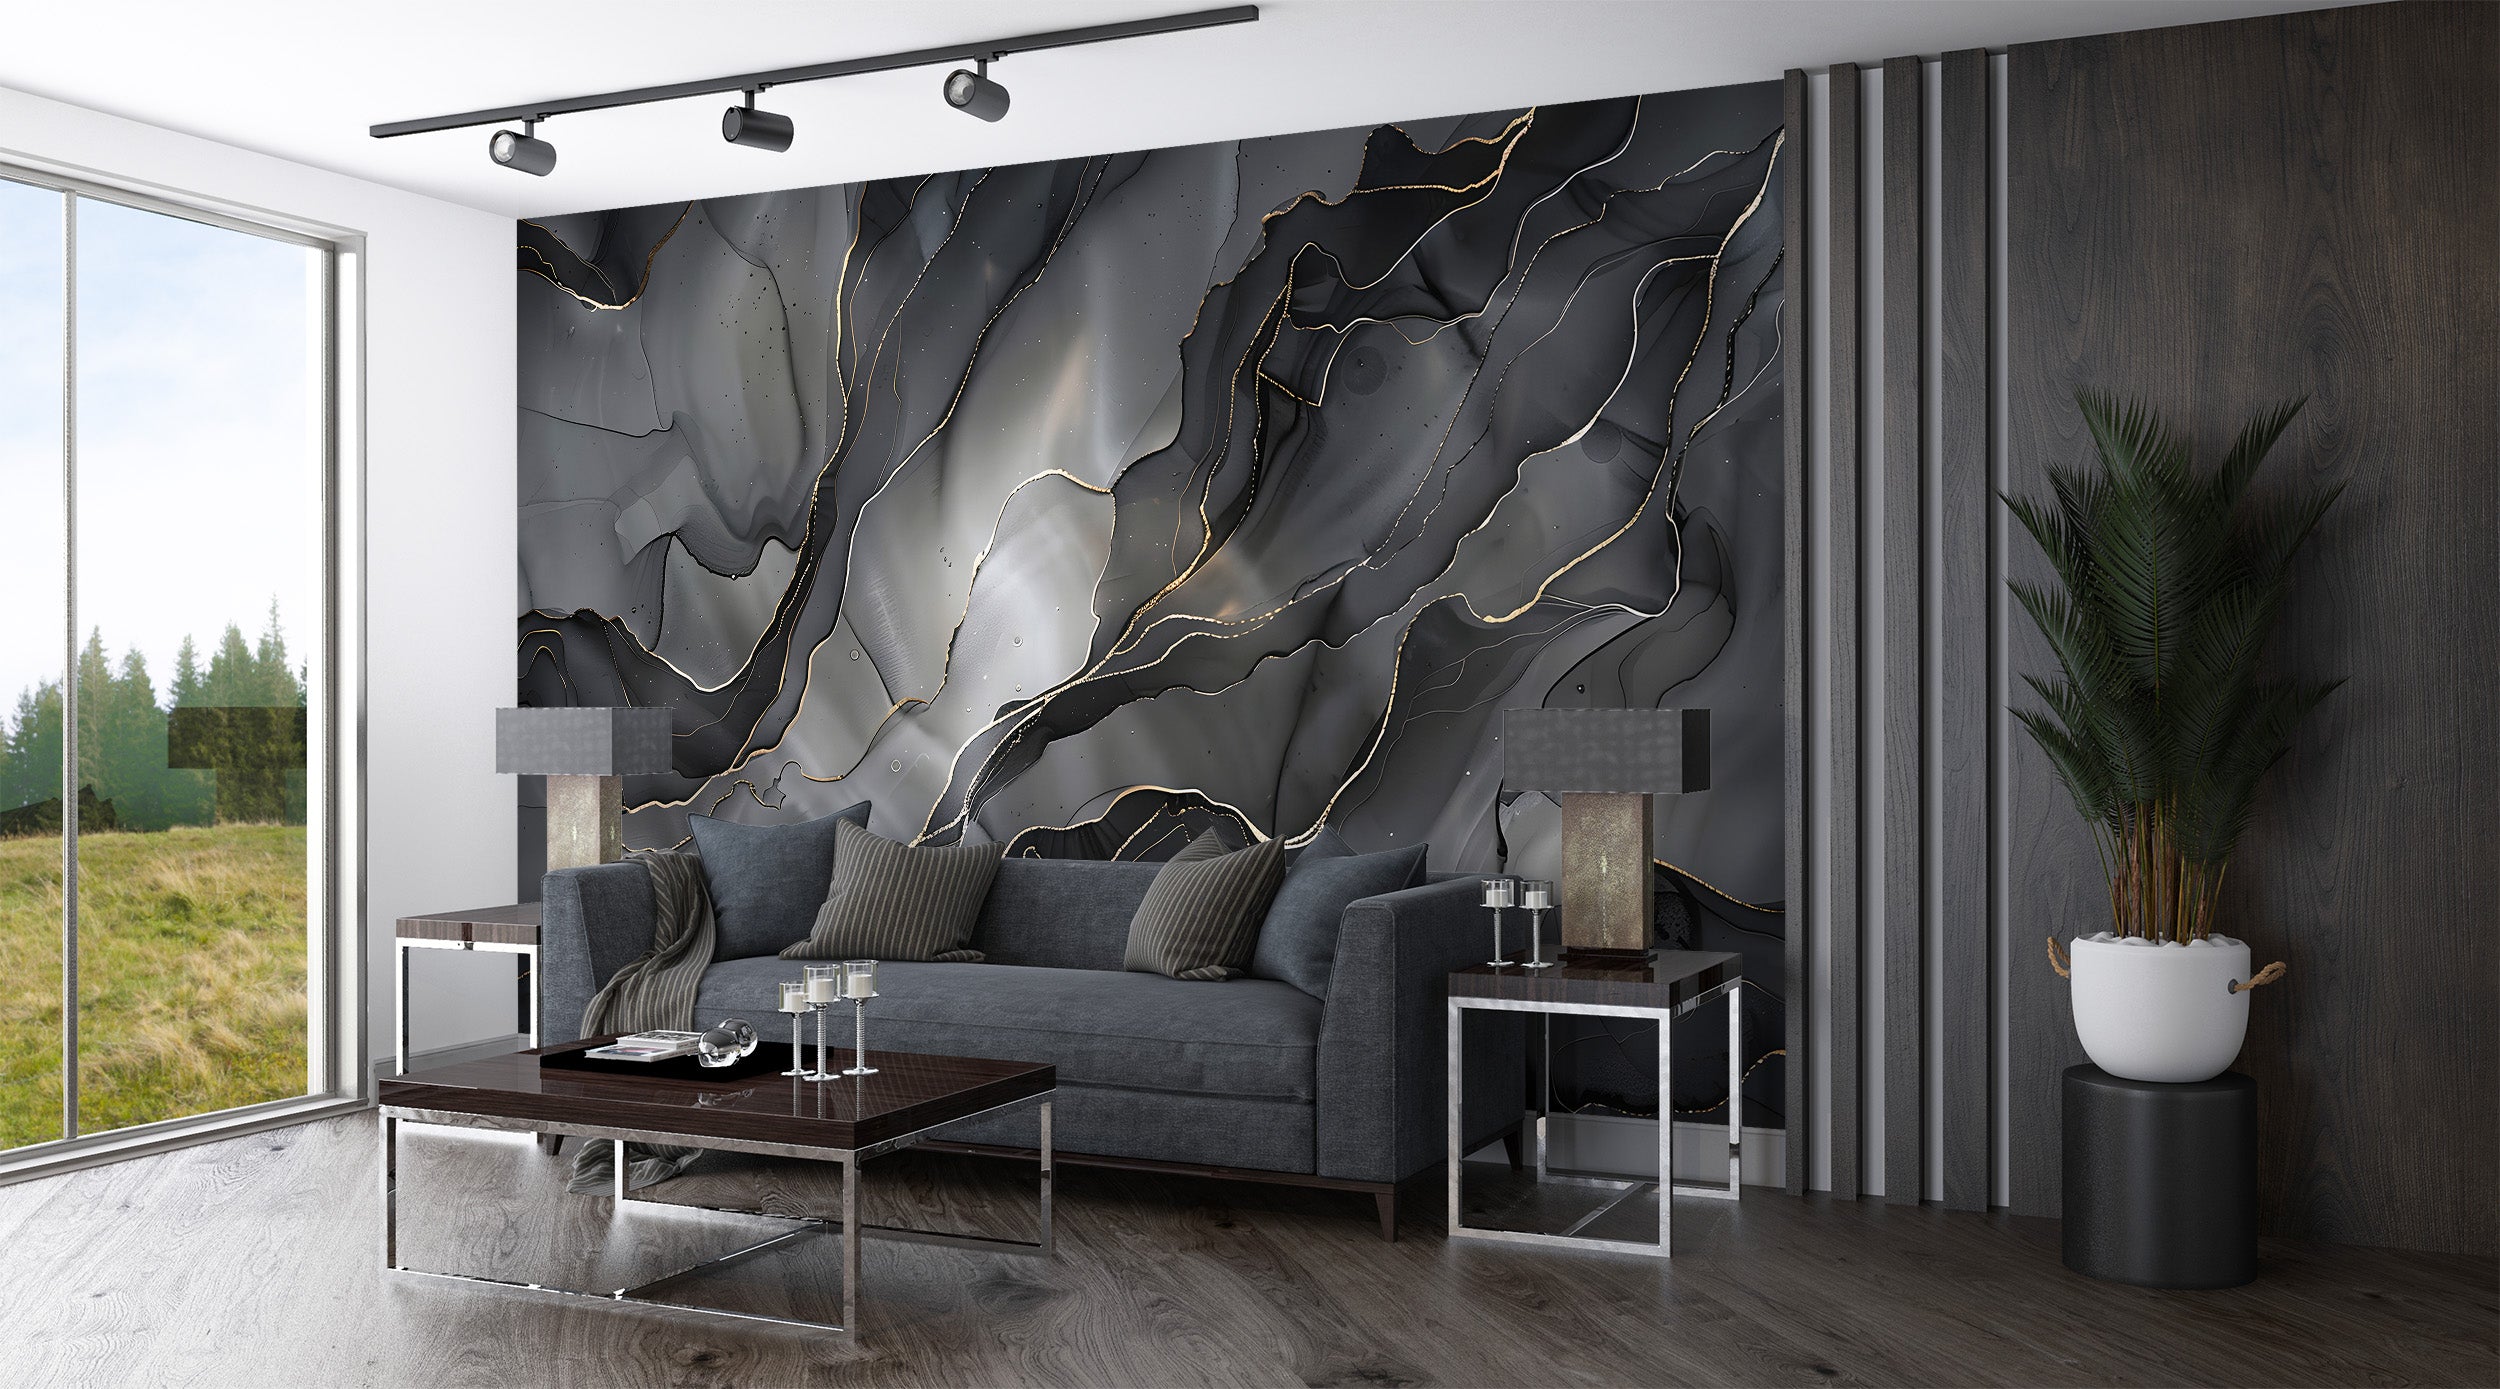 Black Alcohol Ink Wall Mural, Peel and Stick Abstract Dark Wallpaper, Removable Dark Modern Wall Art